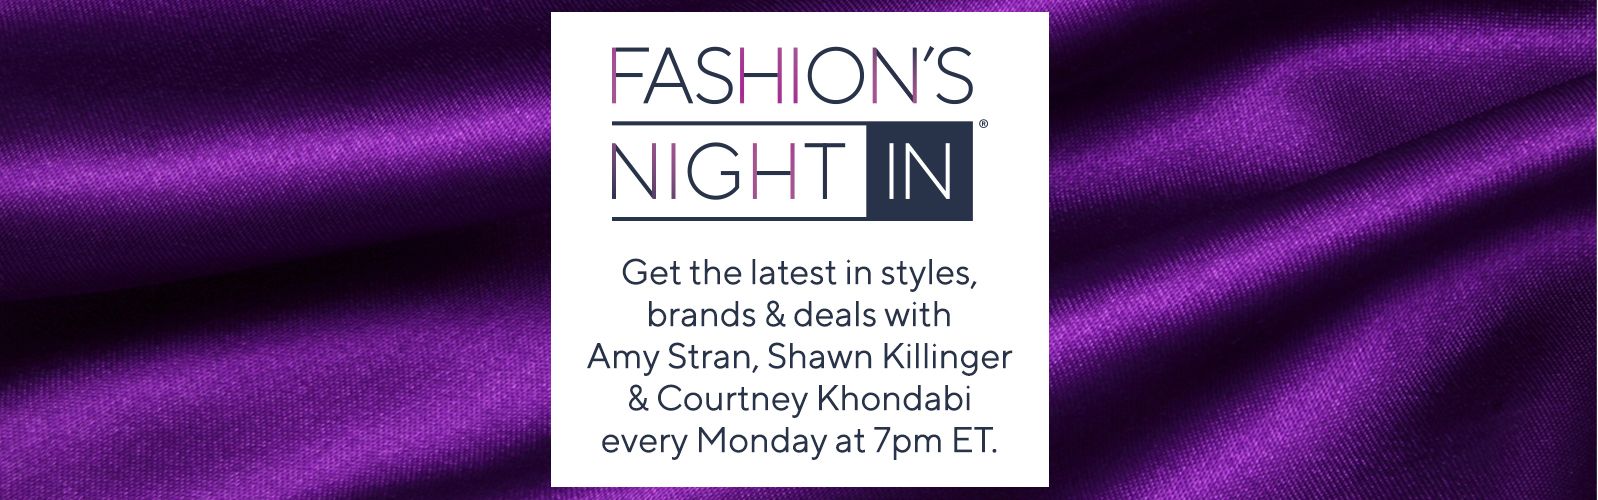 Fashion's Night In  Get the latest in styles, brands & deals with Amy Stran, Shawn Killinger & Courtney Khondabi every Monday at 7pm ET.